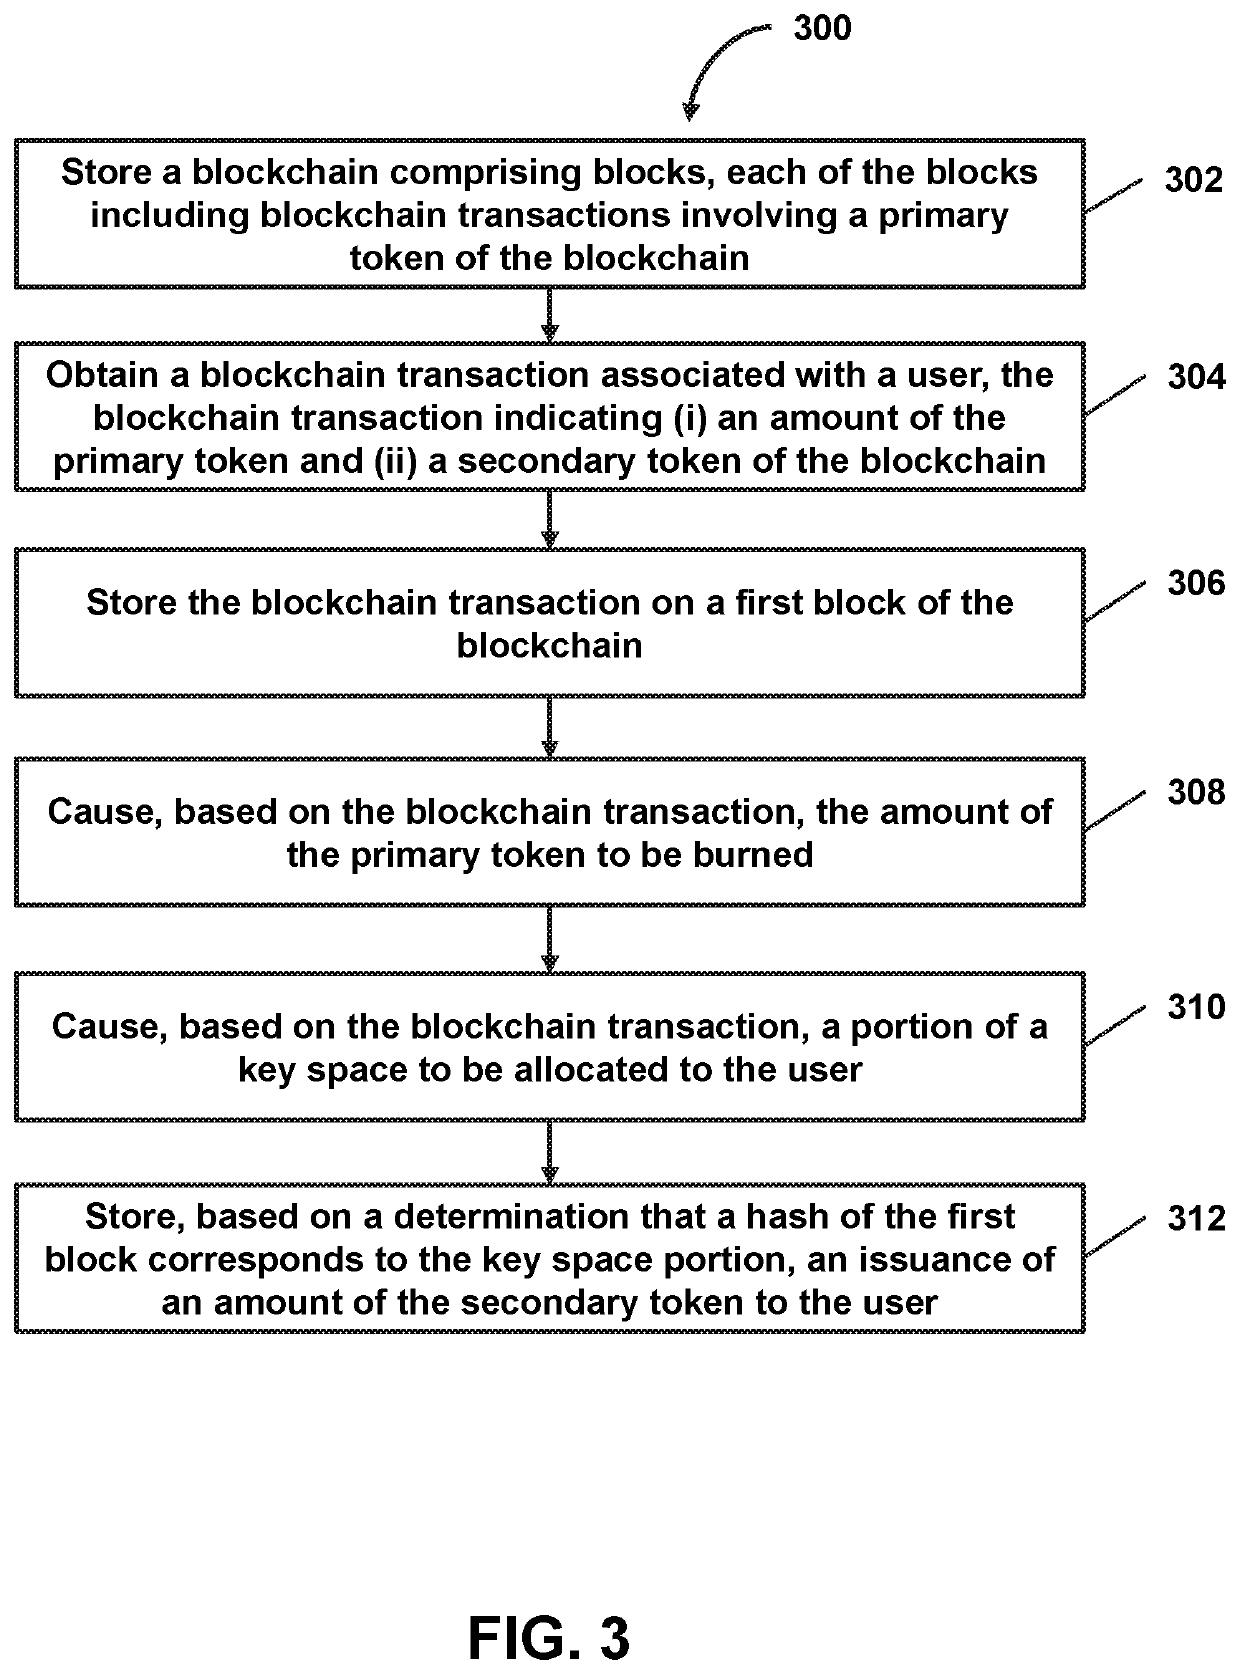 Probabilistic secondary token issuance on a blockchain based on burning of a primary token of the blockchain